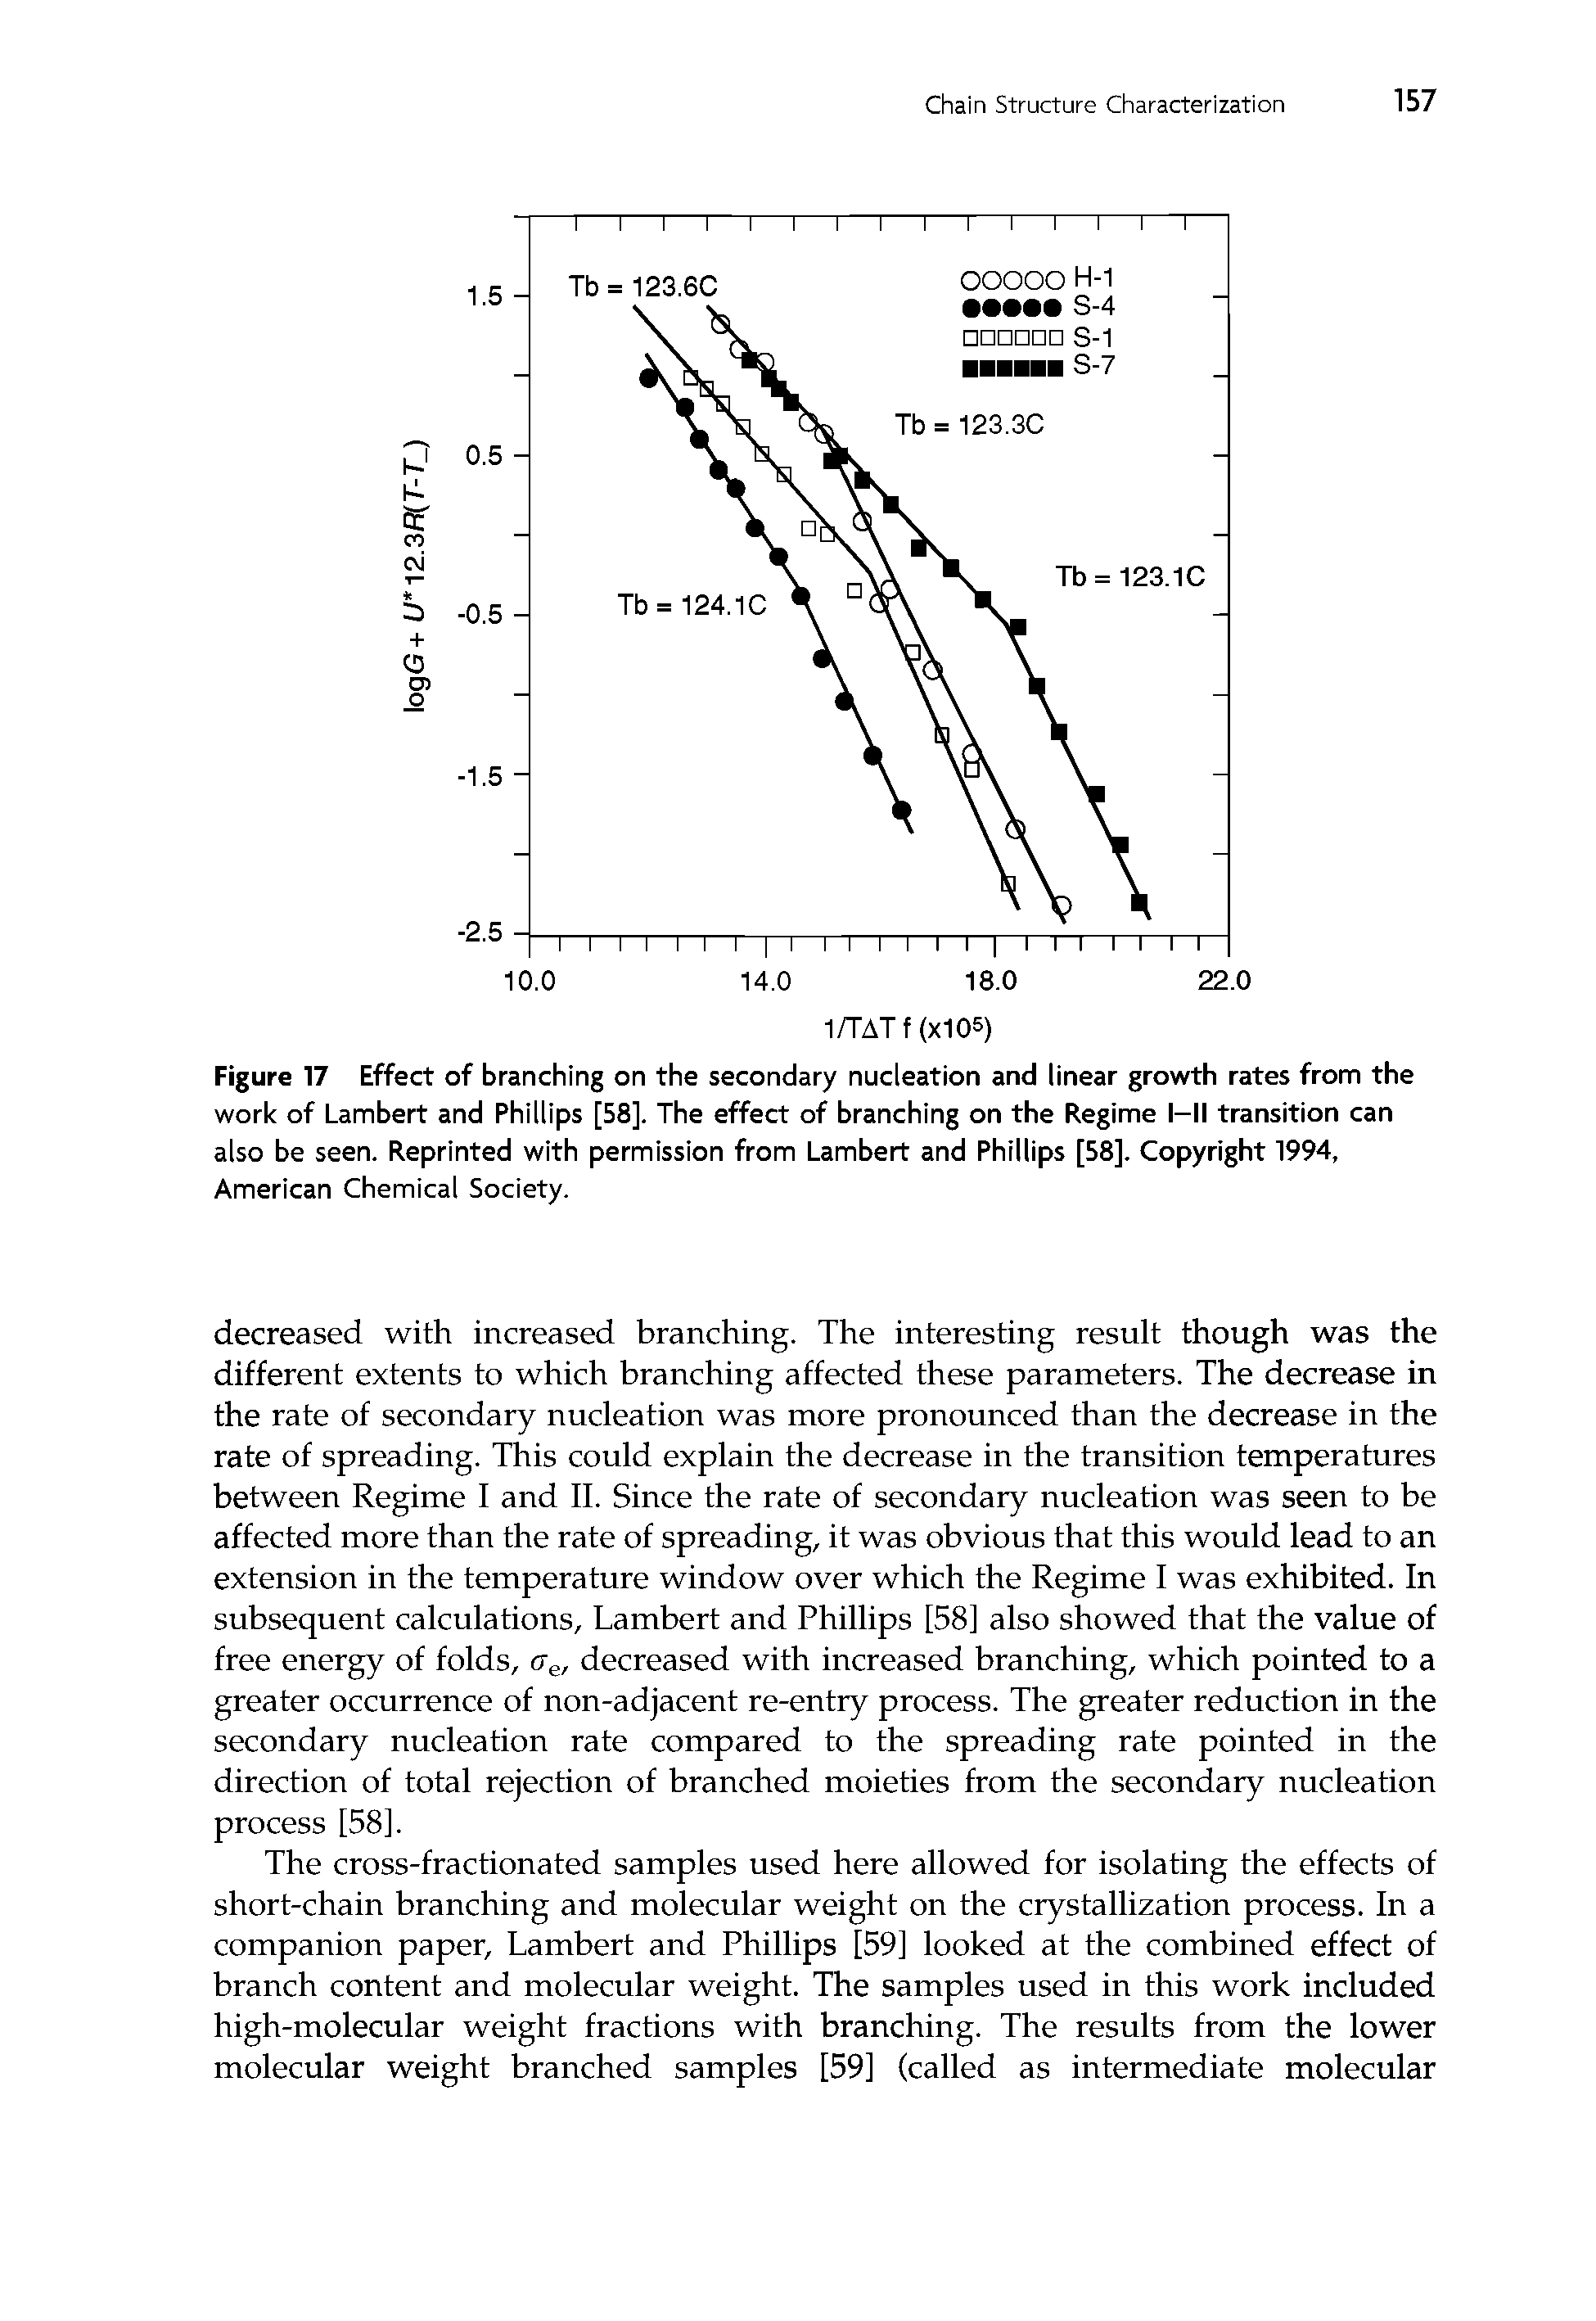 Figure 17 Effect of branching on the secondary nucleation and linear growth rates from the work of Lambert and Phillips [58]. The effect of branching on the Regime l-ll transition can also be seen. Reprinted with permission from Lambert and Phillips [58]. Copyright 1994, American Chemical Society.